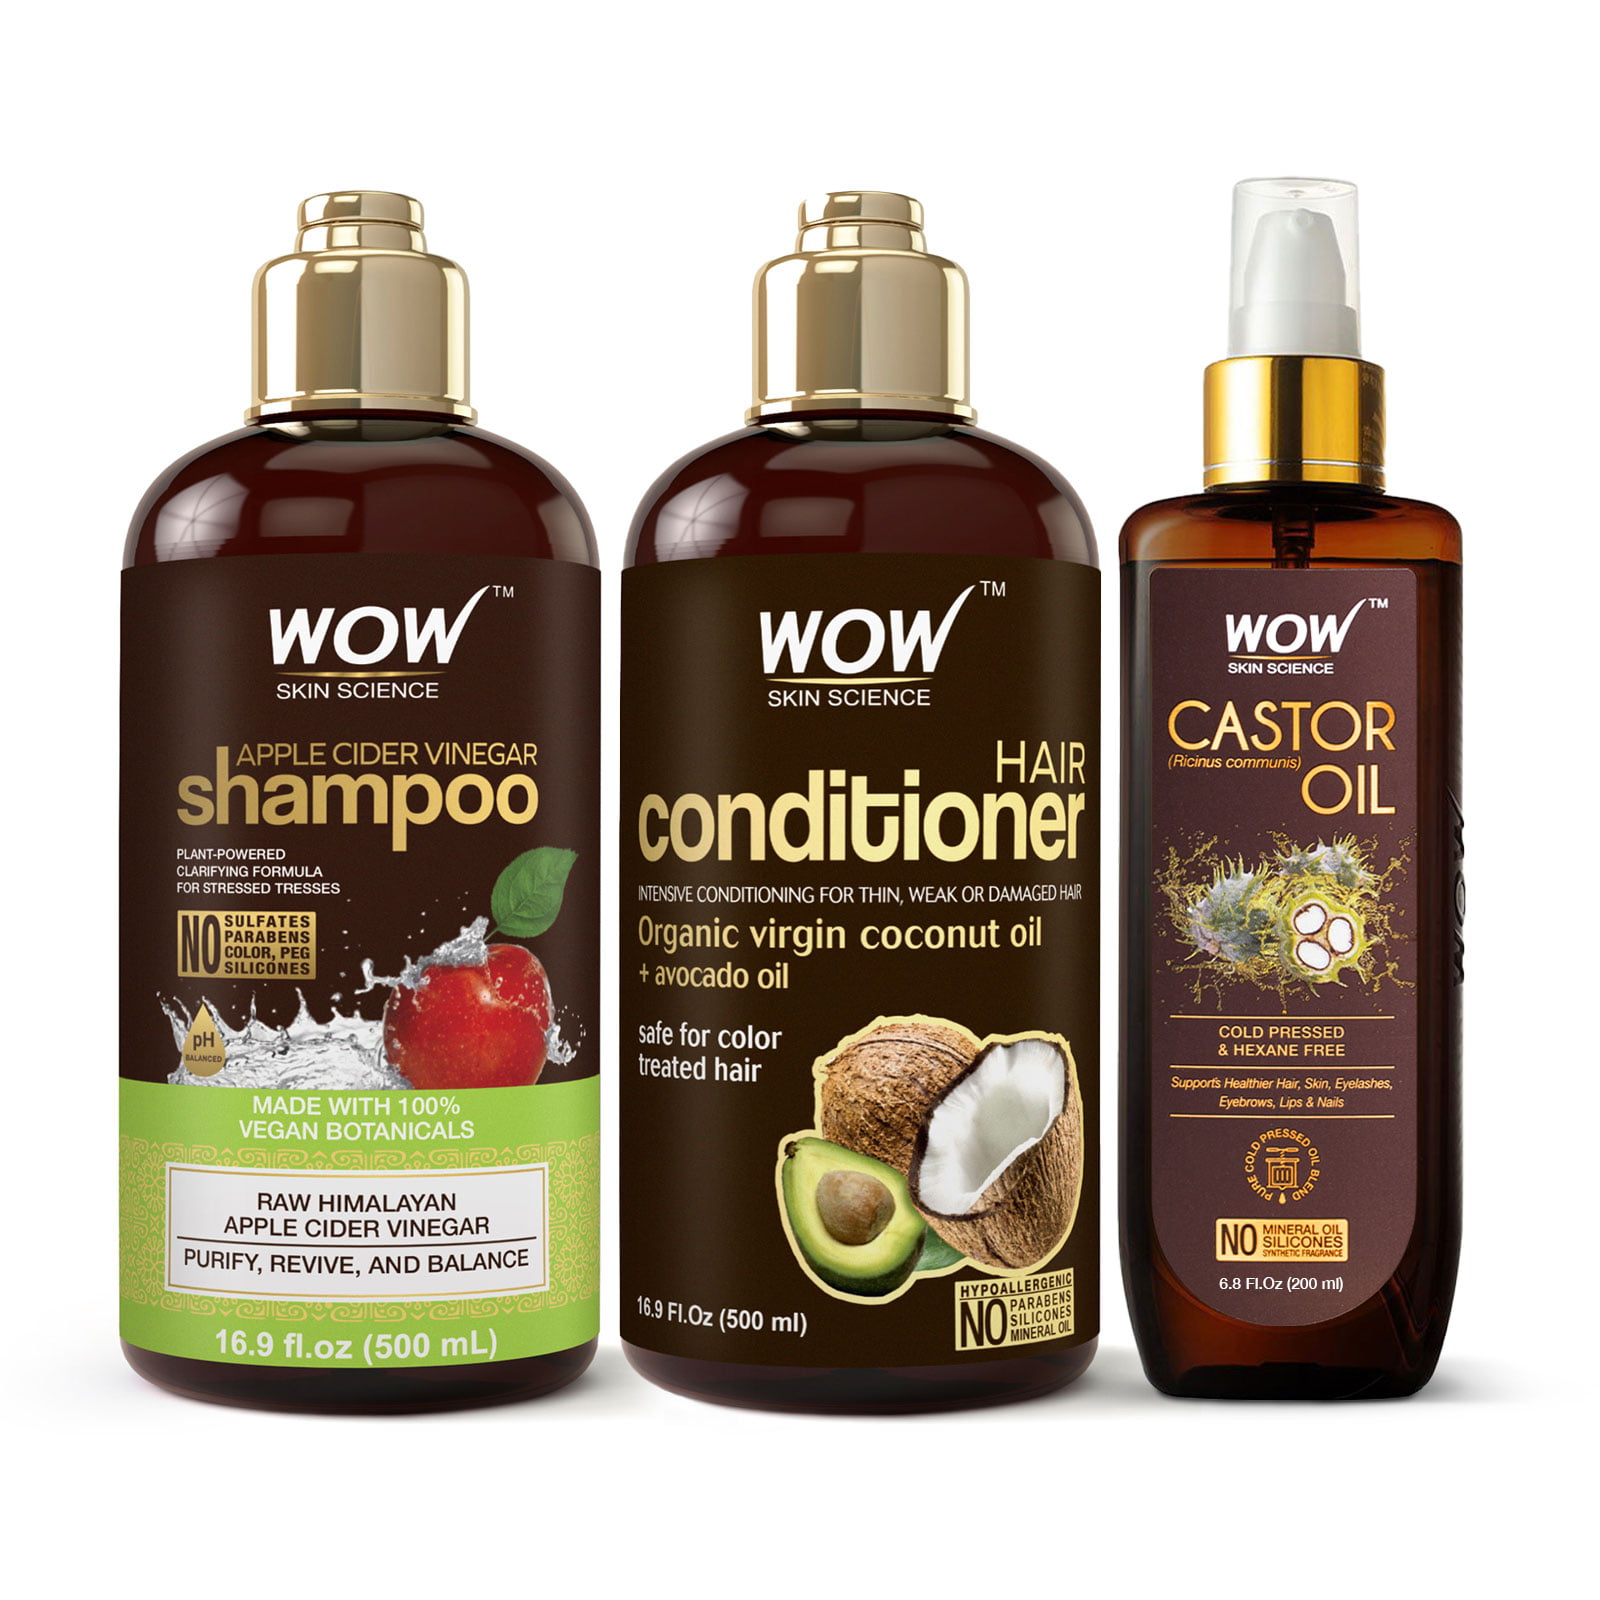 WOW Skin Science Clarifying & Nourishing Apple Cider Vinegar Shampoo and  Coconut Avocado Hair Conditioner with Castor Oil, Full Size Set, 3 Piece -  